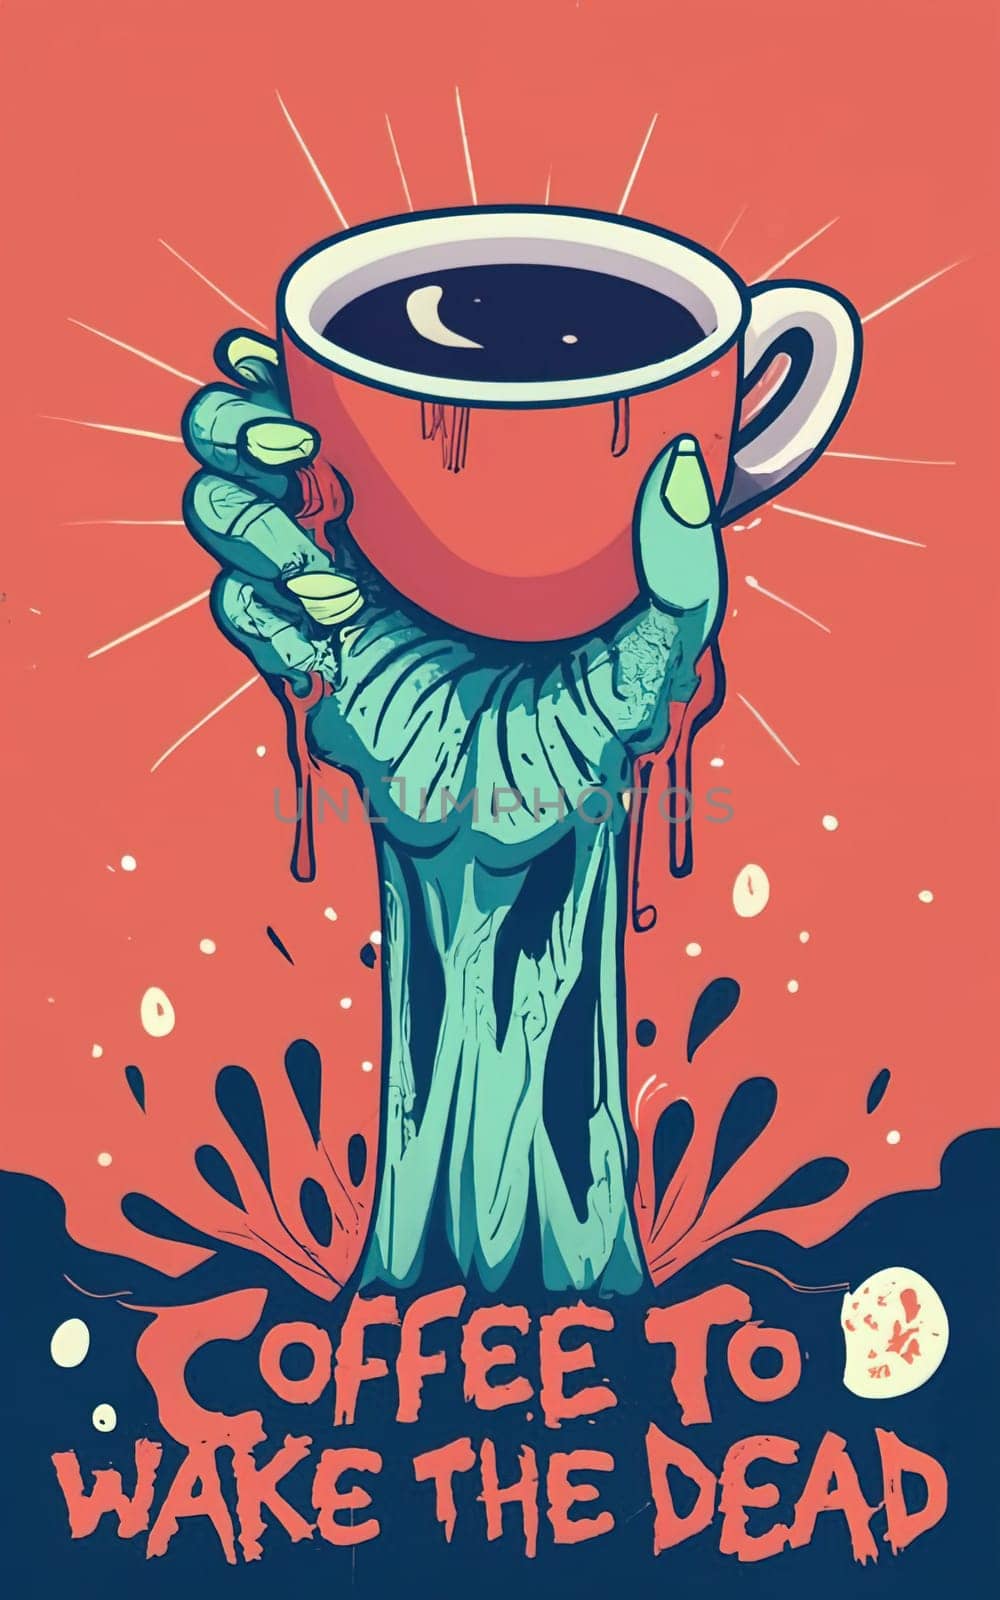 T-Shirt Design: Zombie Hand Rising with Coffee Mug - 'Coffee to Wake the Dead' Typography by igor010